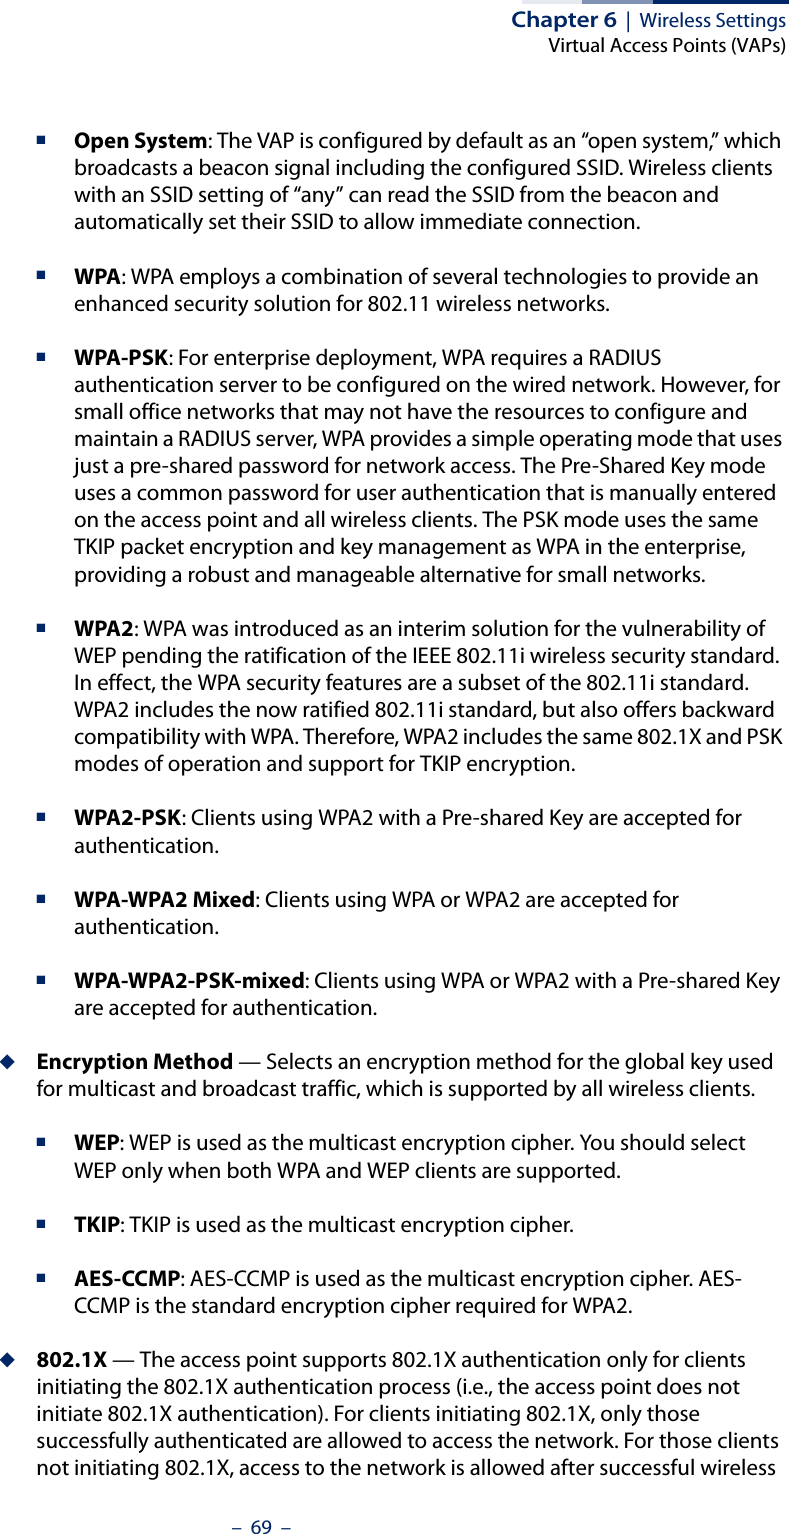 Chapter 6  |  Wireless SettingsVirtual Access Points (VAPs)–  69  –■Open System: The VAP is configured by default as an “open system,” which broadcasts a beacon signal including the configured SSID. Wireless clients with an SSID setting of “any” can read the SSID from the beacon and automatically set their SSID to allow immediate connection. ■WPA: WPA employs a combination of several technologies to provide an enhanced security solution for 802.11 wireless networks.■WPA-PSK: For enterprise deployment, WPA requires a RADIUS authentication server to be configured on the wired network. However, for small office networks that may not have the resources to configure and maintain a RADIUS server, WPA provides a simple operating mode that uses just a pre-shared password for network access. The Pre-Shared Key mode uses a common password for user authentication that is manually entered on the access point and all wireless clients. The PSK mode uses the same TKIP packet encryption and key management as WPA in the enterprise, providing a robust and manageable alternative for small networks.■WPA2: WPA was introduced as an interim solution for the vulnerability of WEP pending the ratification of the IEEE 802.11i wireless security standard. In effect, the WPA security features are a subset of the 802.11i standard. WPA2 includes the now ratified 802.11i standard, but also offers backward compatibility with WPA. Therefore, WPA2 includes the same 802.1X and PSK modes of operation and support for TKIP encryption. ■WPA2-PSK: Clients using WPA2 with a Pre-shared Key are accepted for authentication.■WPA-WPA2 Mixed: Clients using WPA or WPA2 are accepted for authentication.■WPA-WPA2-PSK-mixed: Clients using WPA or WPA2 with a Pre-shared Key are accepted for authentication.◆Encryption Method — Selects an encryption method for the global key used for multicast and broadcast traffic, which is supported by all wireless clients.■WEP: WEP is used as the multicast encryption cipher. You should select WEP only when both WPA and WEP clients are supported. ■TKIP: TKIP is used as the multicast encryption cipher.■AES-CCMP: AES-CCMP is used as the multicast encryption cipher. AES-CCMP is the standard encryption cipher required for WPA2.◆802.1X — The access point supports 802.1X authentication only for clients initiating the 802.1X authentication process (i.e., the access point does not initiate 802.1X authentication). For clients initiating 802.1X, only those successfully authenticated are allowed to access the network. For those clients not initiating 802.1X, access to the network is allowed after successful wireless 